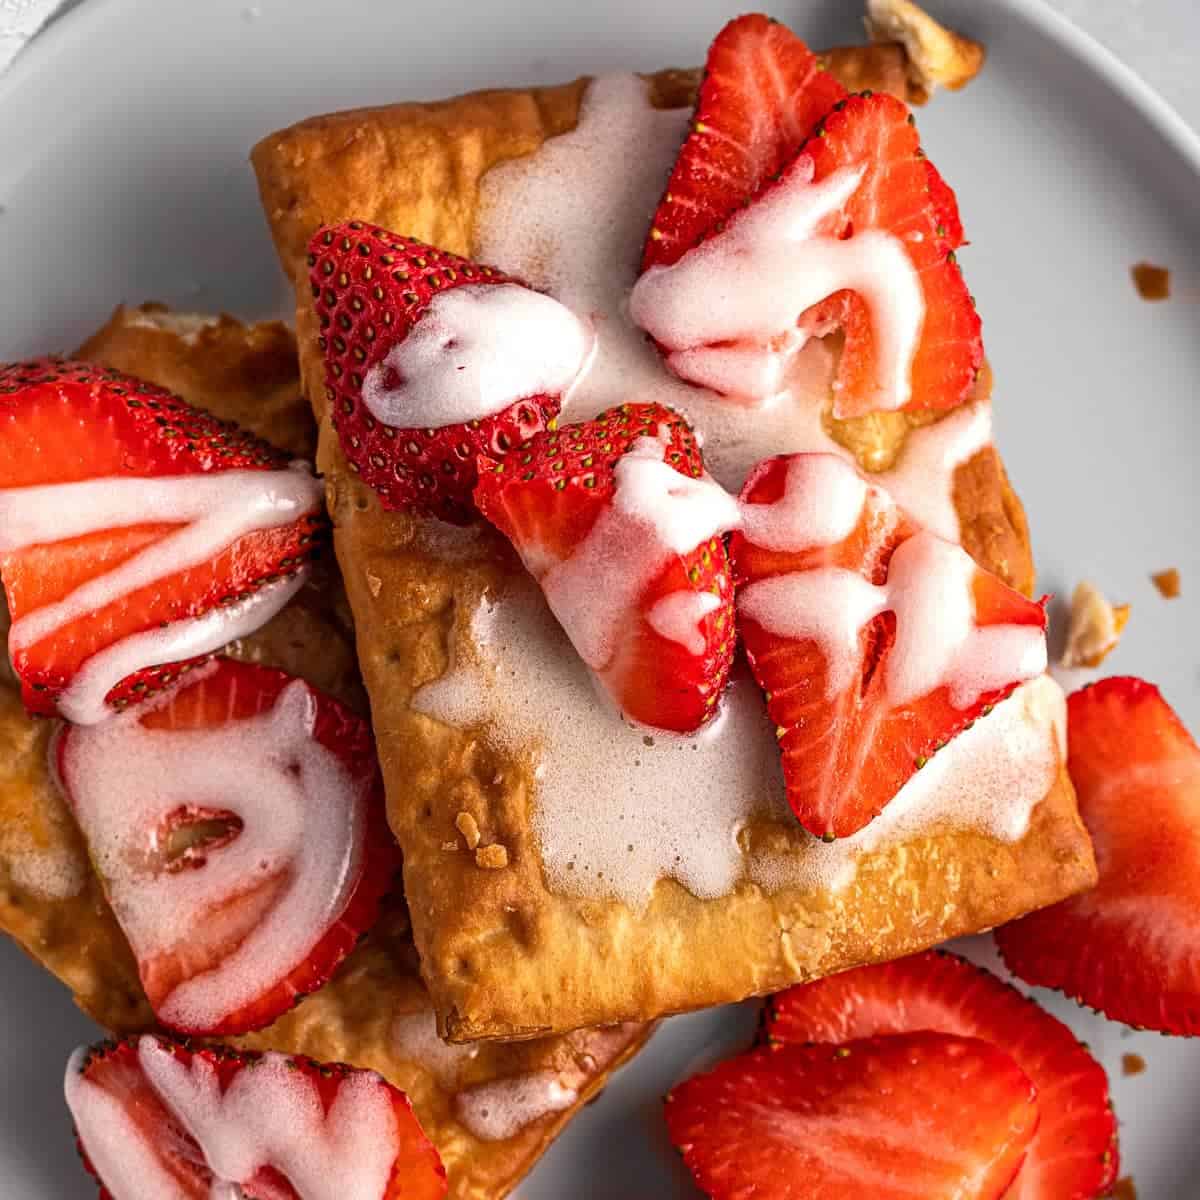 Overhead view of a crispy air-fried toaster strudel placed on a white plate with fresh strawberries on top.